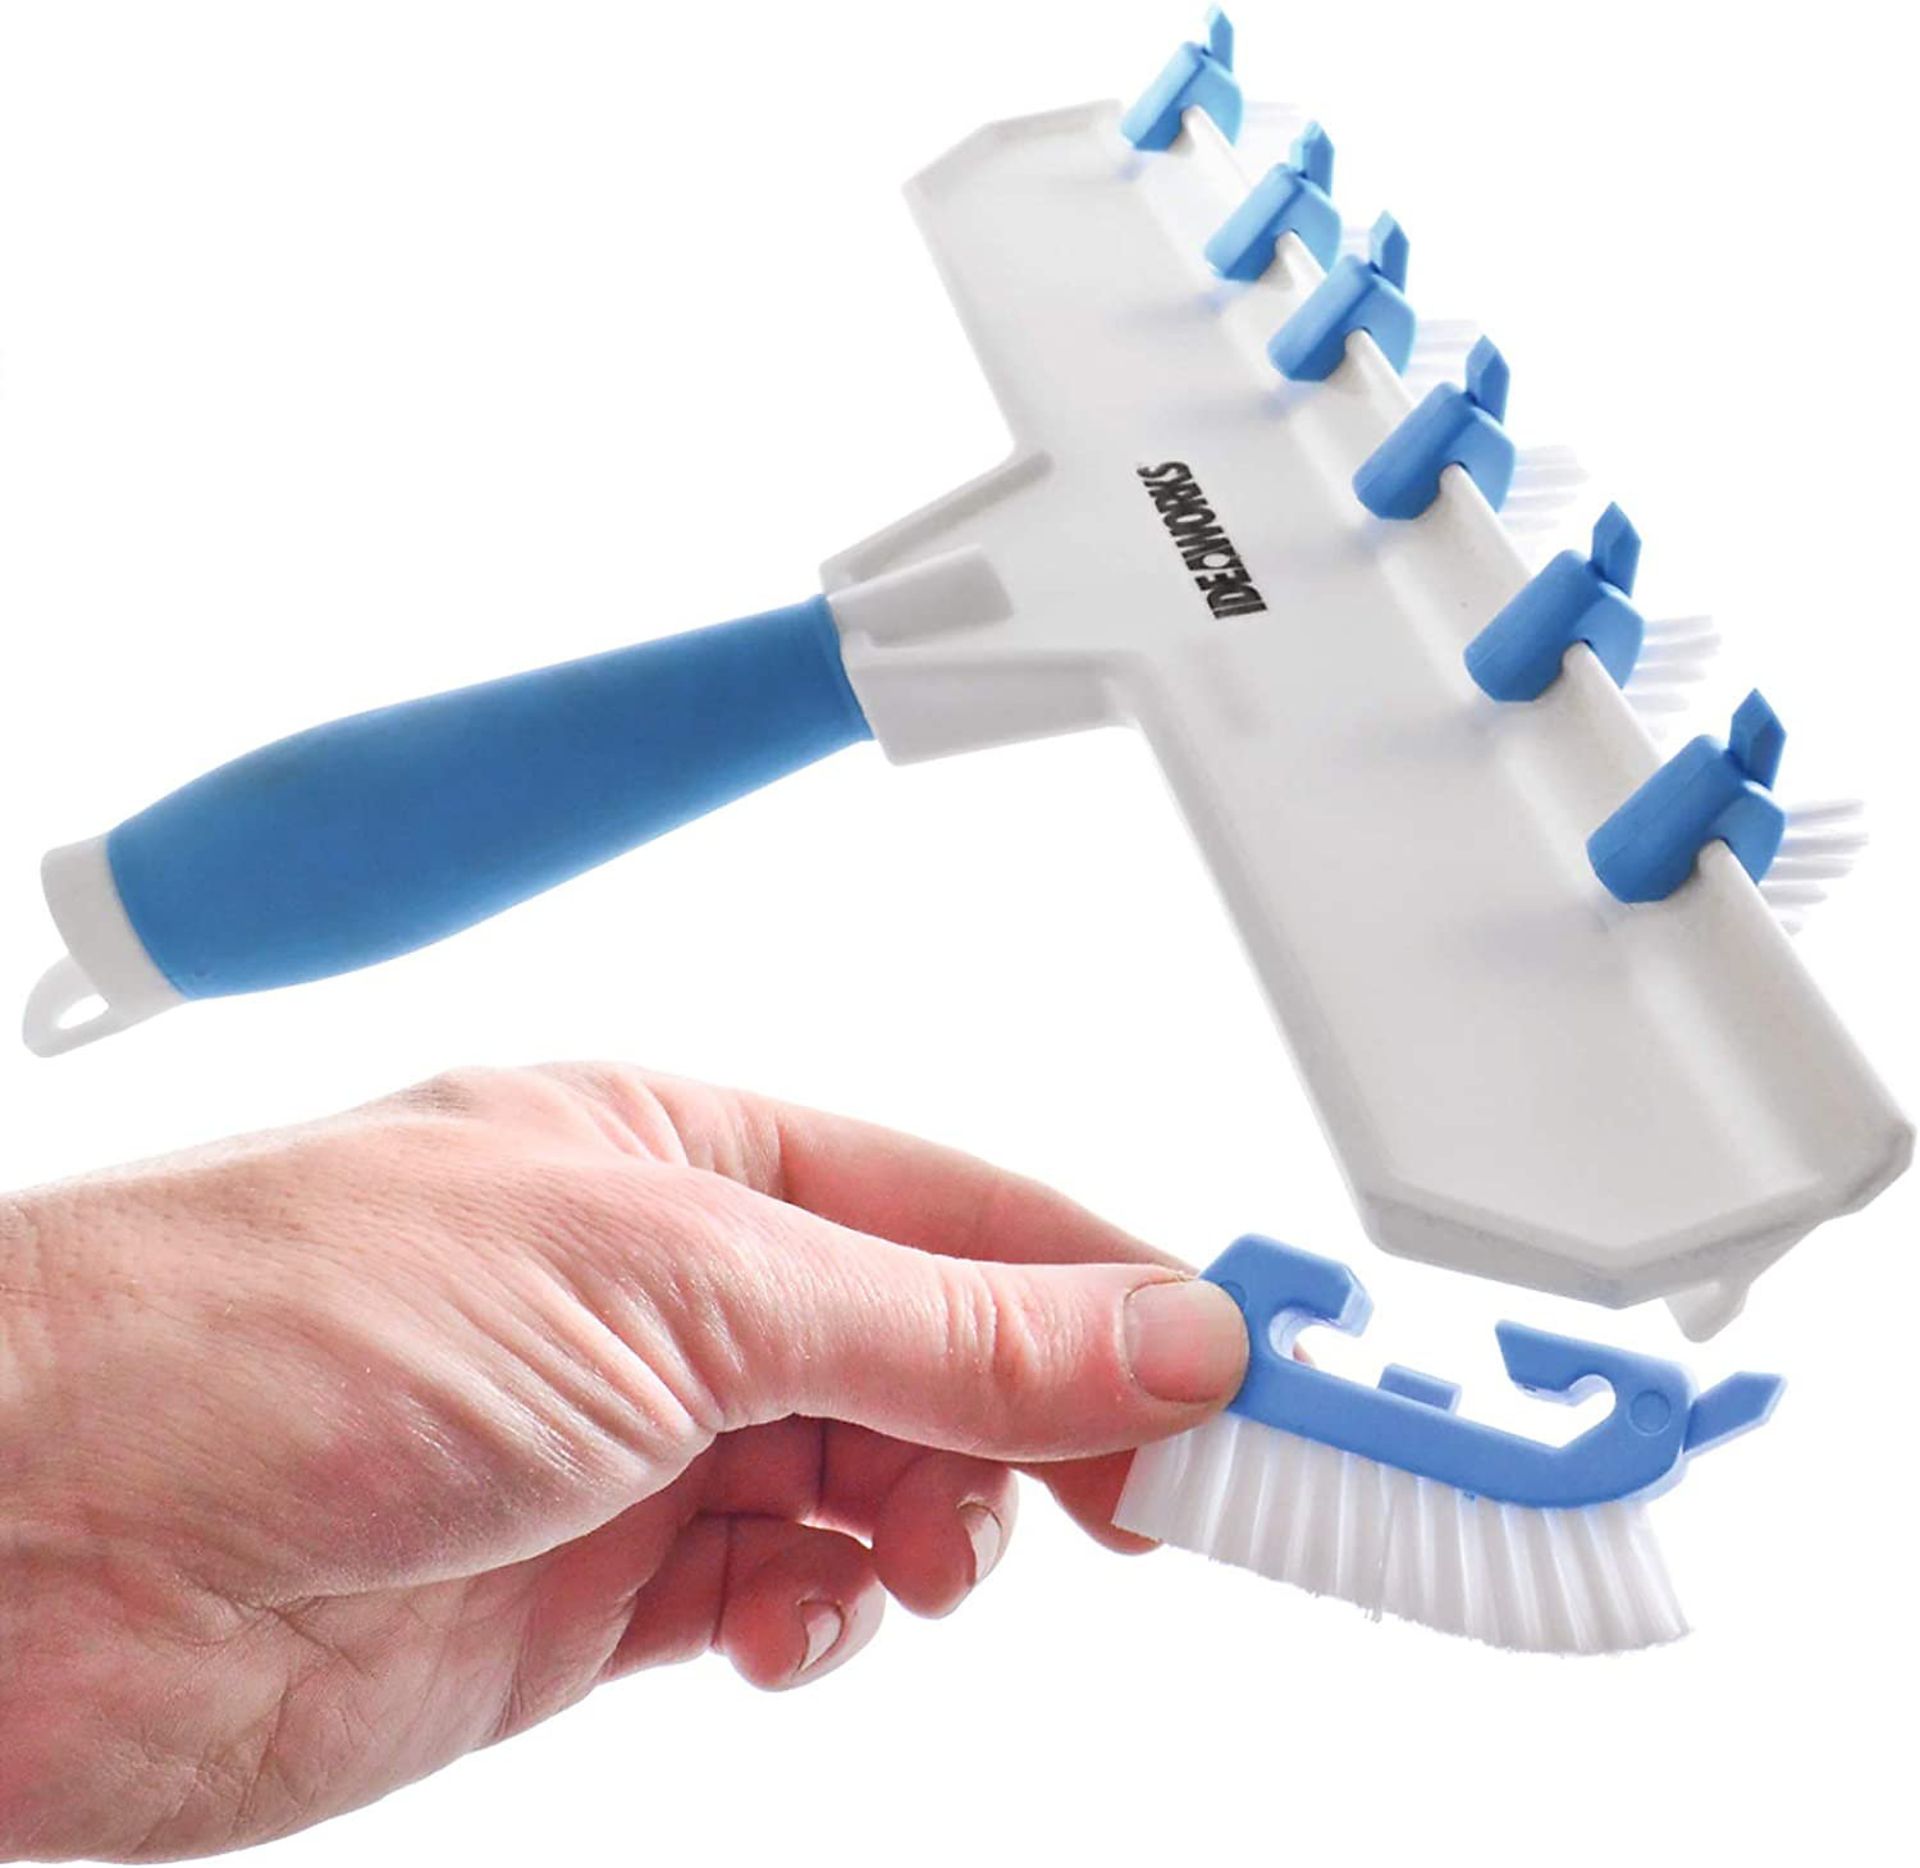 20 X BRAND NEW ADJUSTABLE HANDHELD GROUT CLEANING TOOLWITH SOFT GRIP HANDLE AND 8 MINI BRUSH HEADS